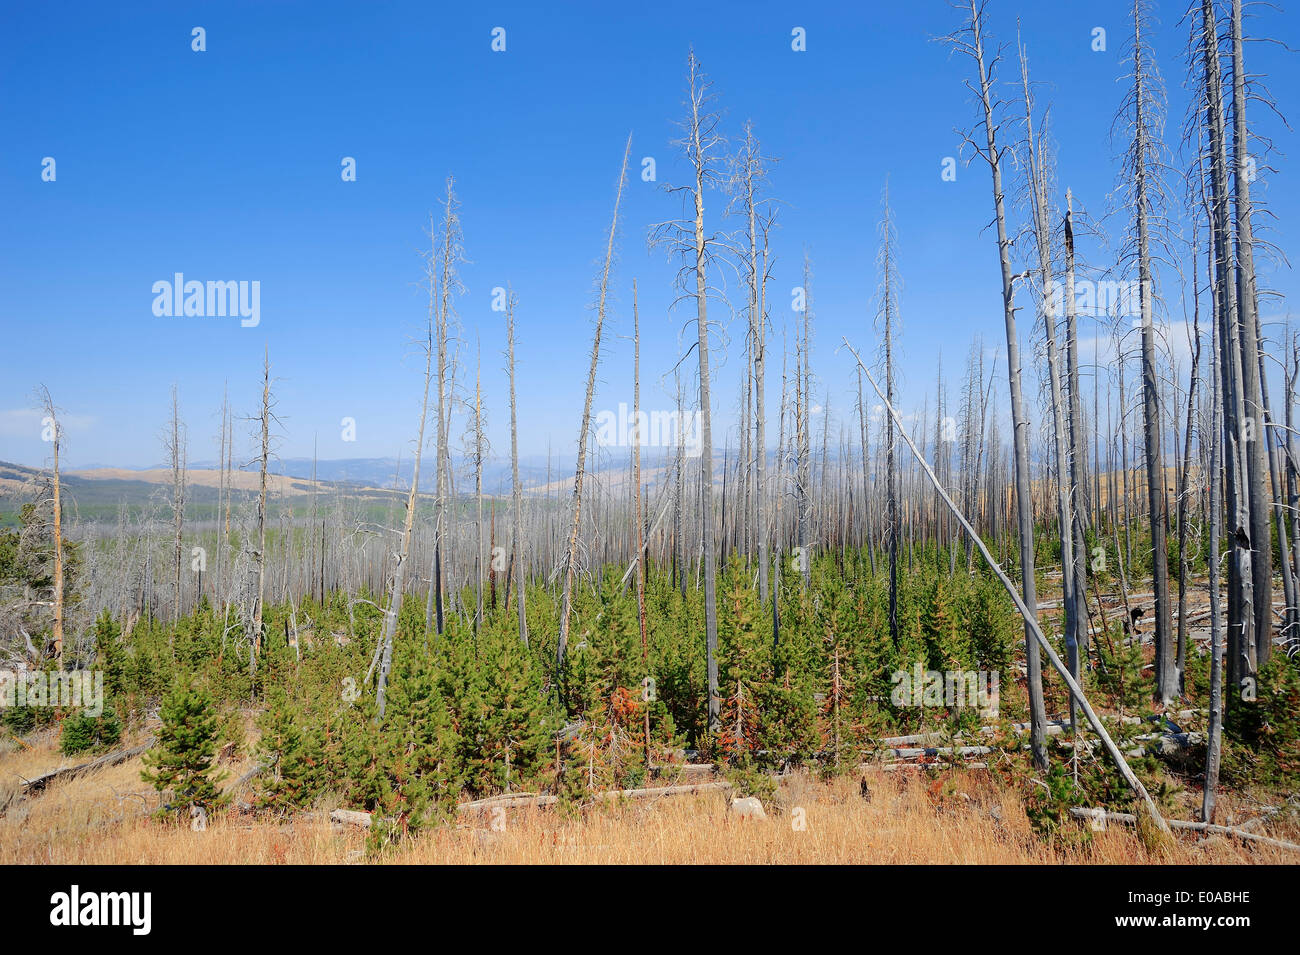 Coniferus forest with dead and renewable Coniferus trees after forest fire, Yellowstone national park, Wyoming, USA Stock Photo